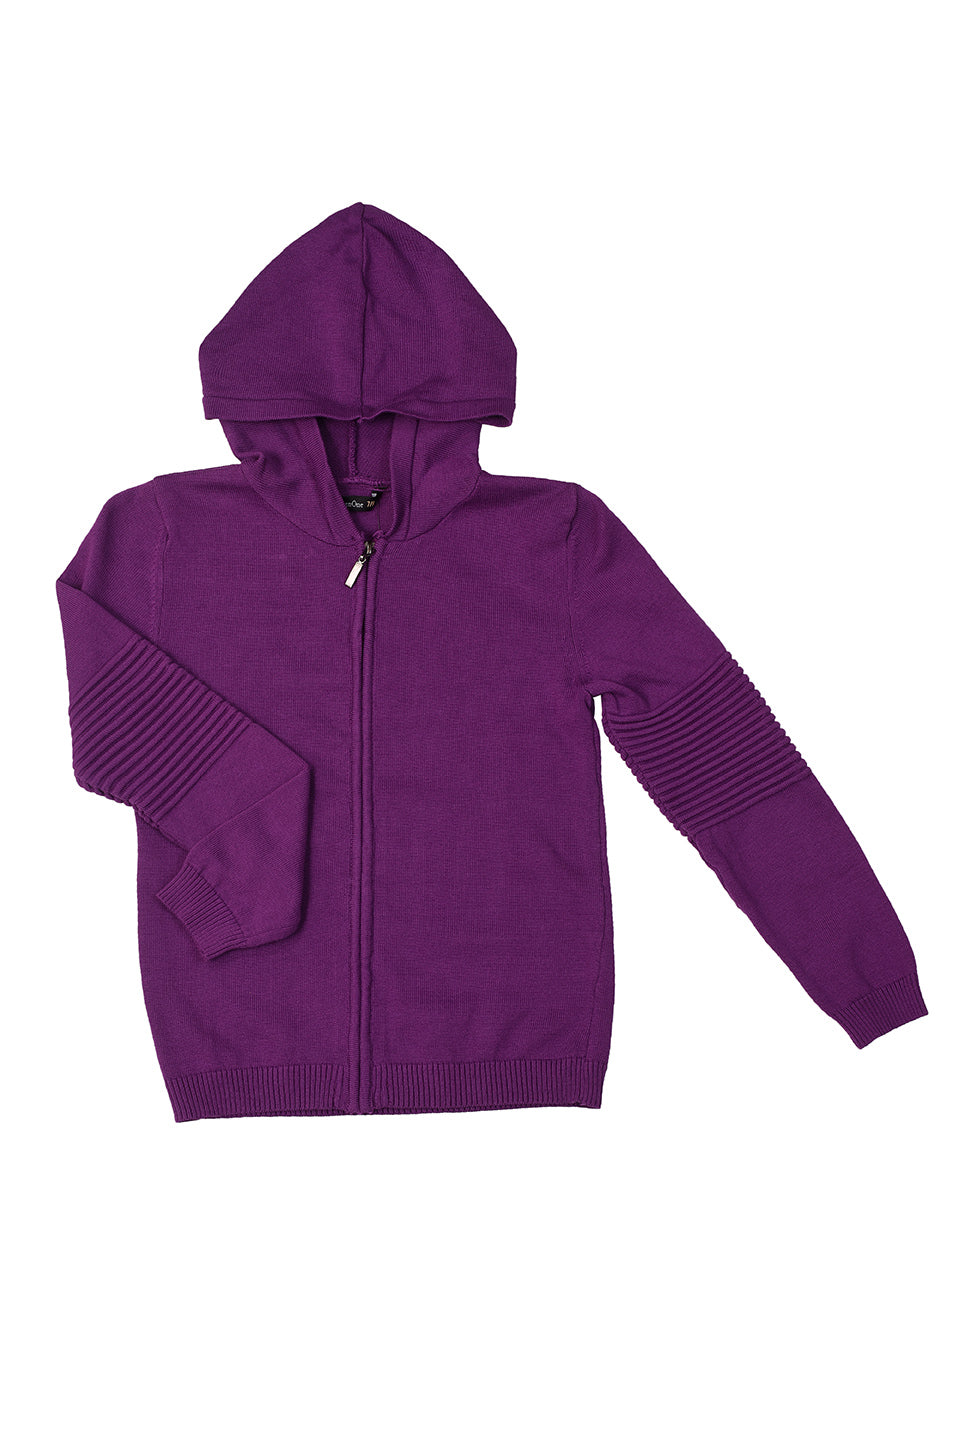 KDS-BC-12579 HOODED PULL OVER PURPLE